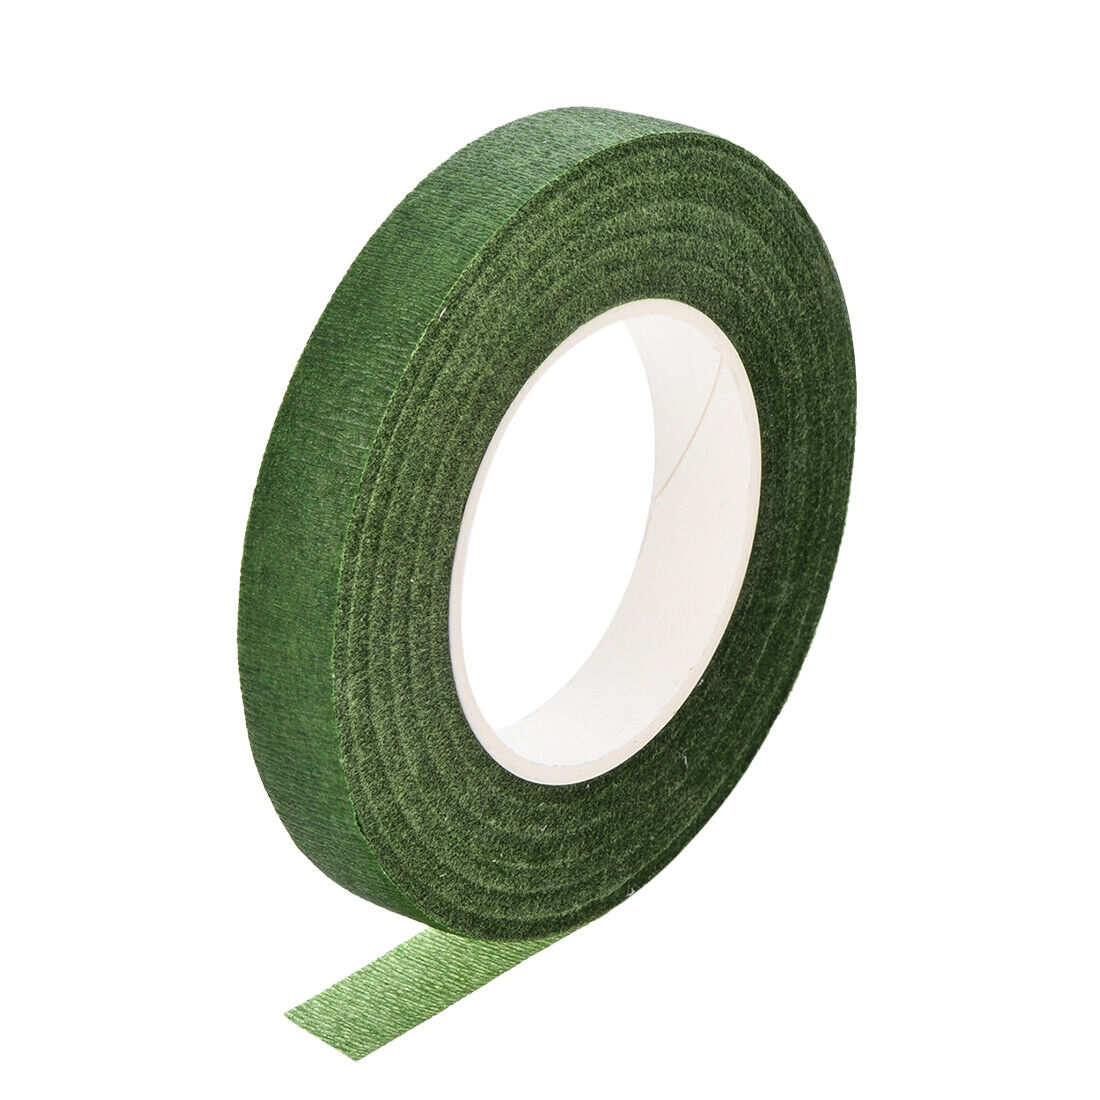 1Roll 1/2x30Yard Green Floral Tape Flower Adhesives Floral